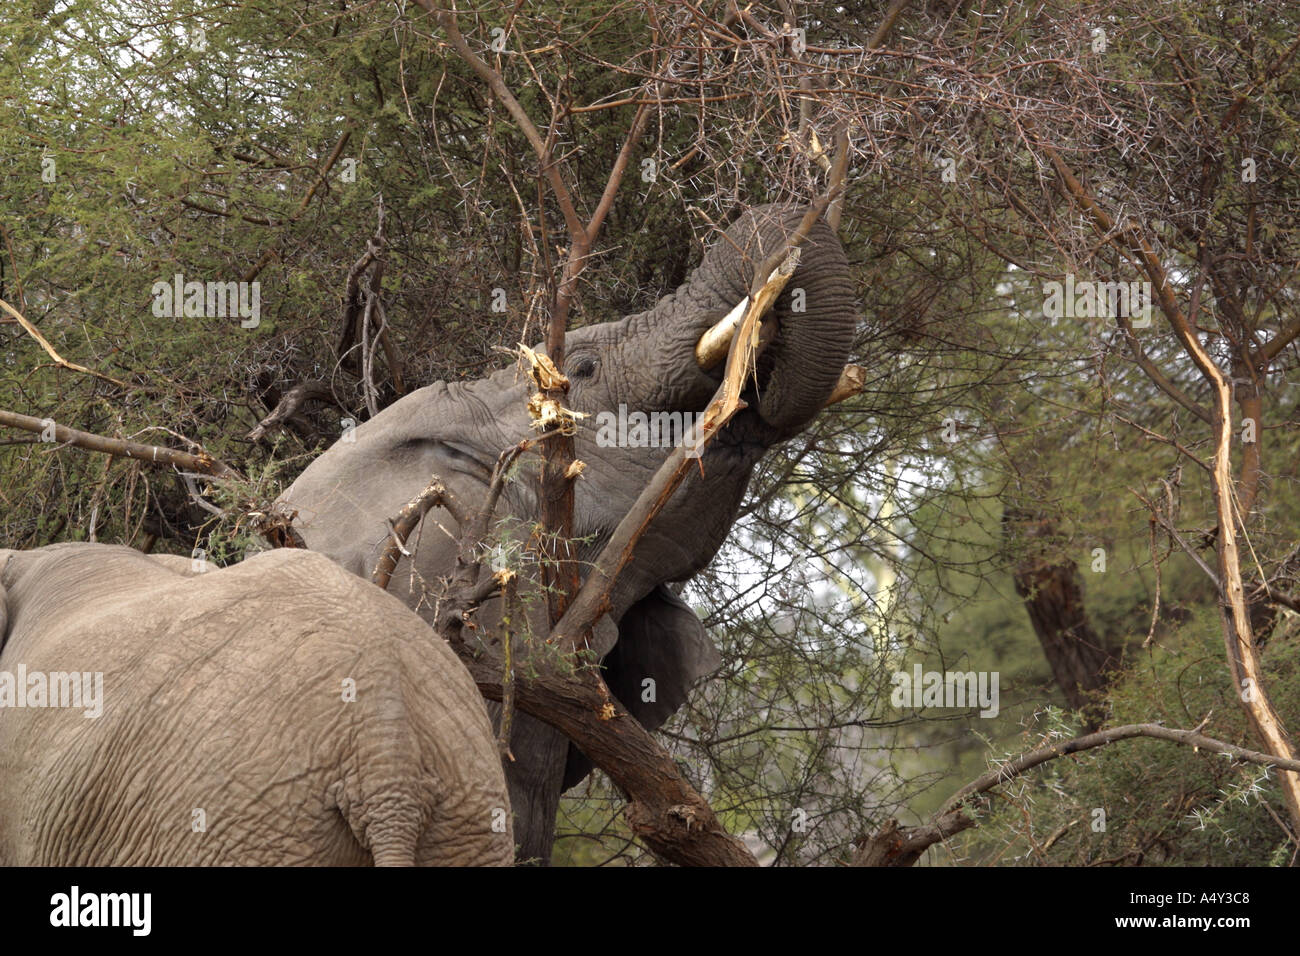 Elephant breaking thorn branches to feed Stock Photo